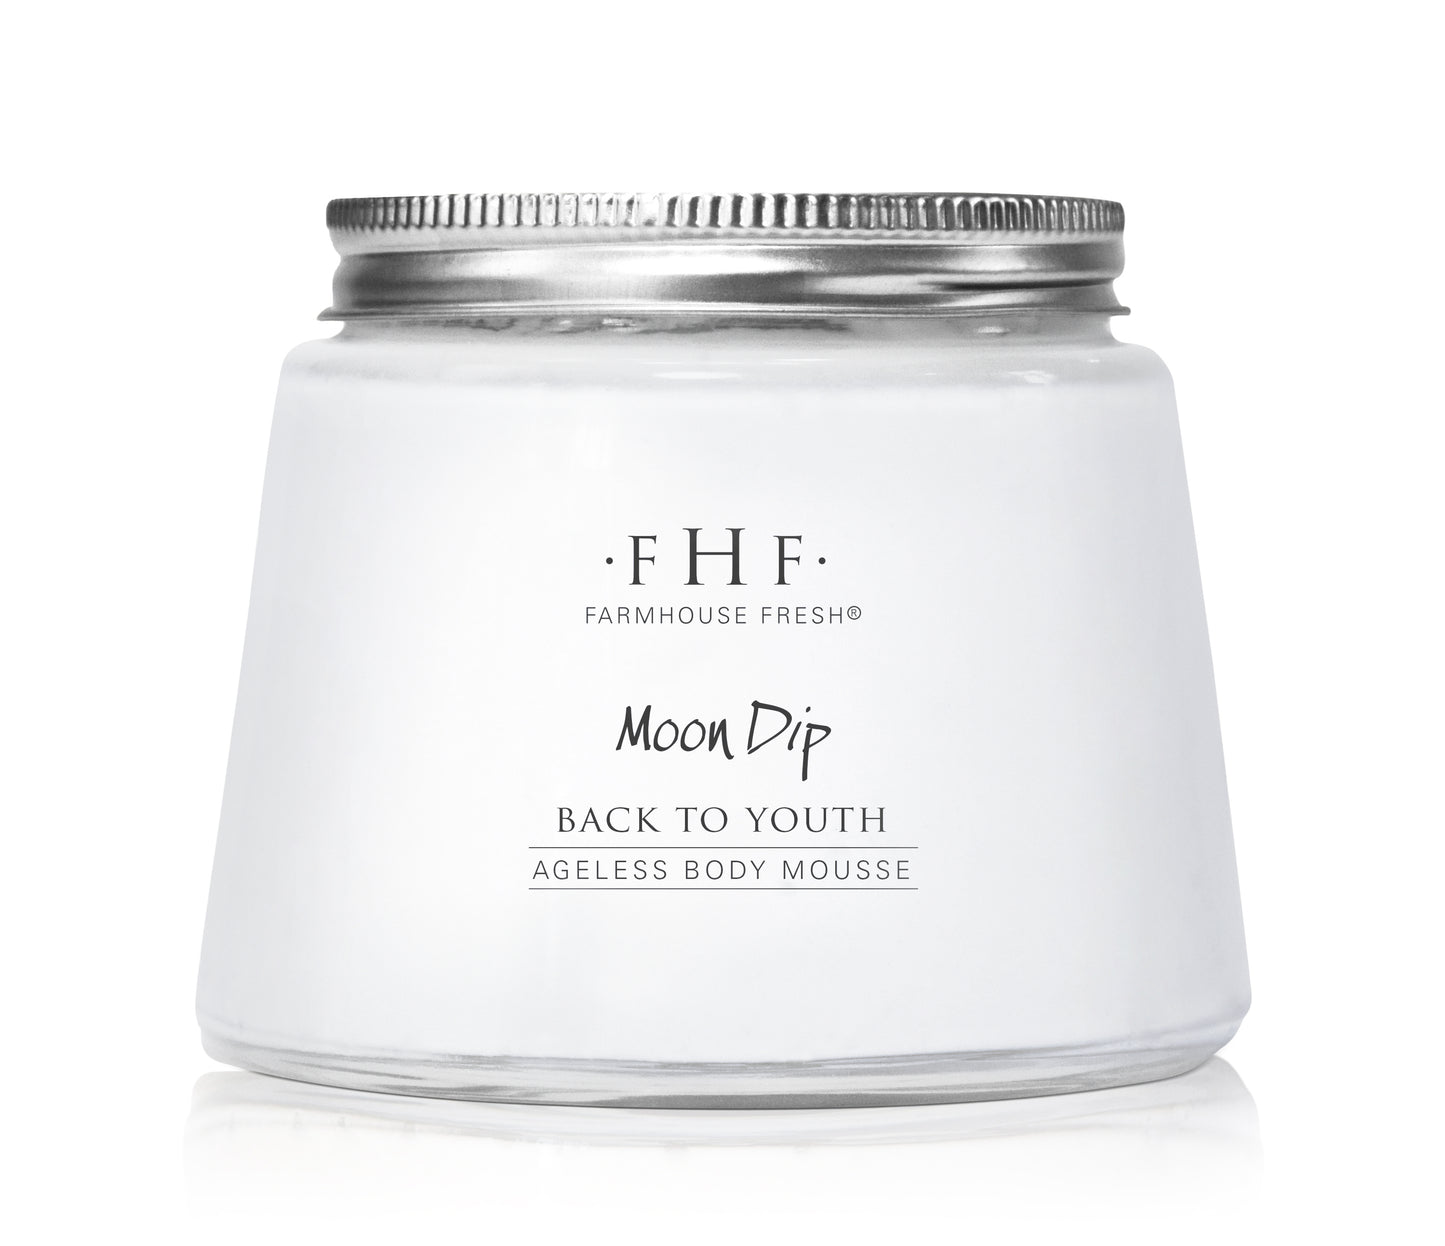 FarmHouse Fresh Moon Dip Back to Youth Ageless Body Mousse